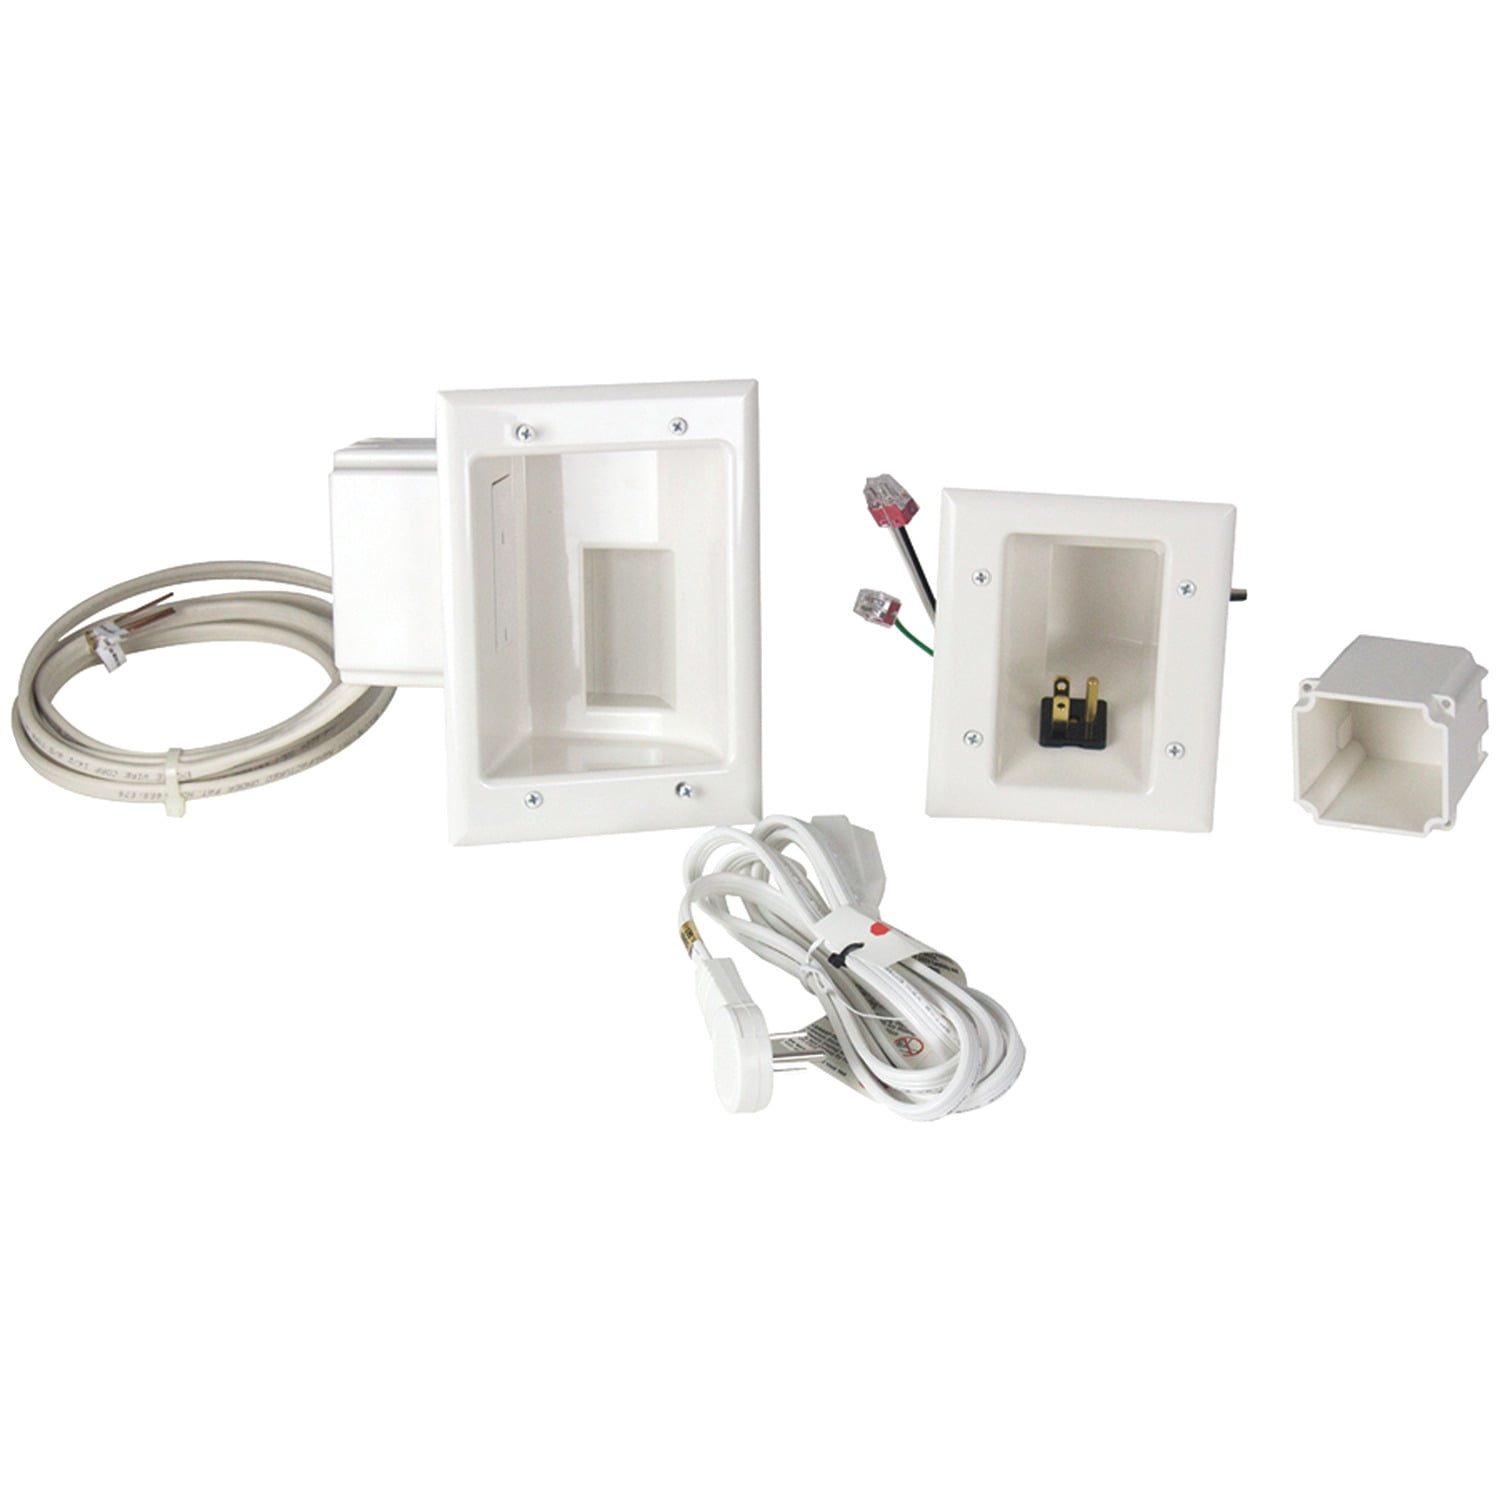 SPORTLINK in-Wall TV Cable Management Kit - Hide TV Wires Behind the Wall -  White